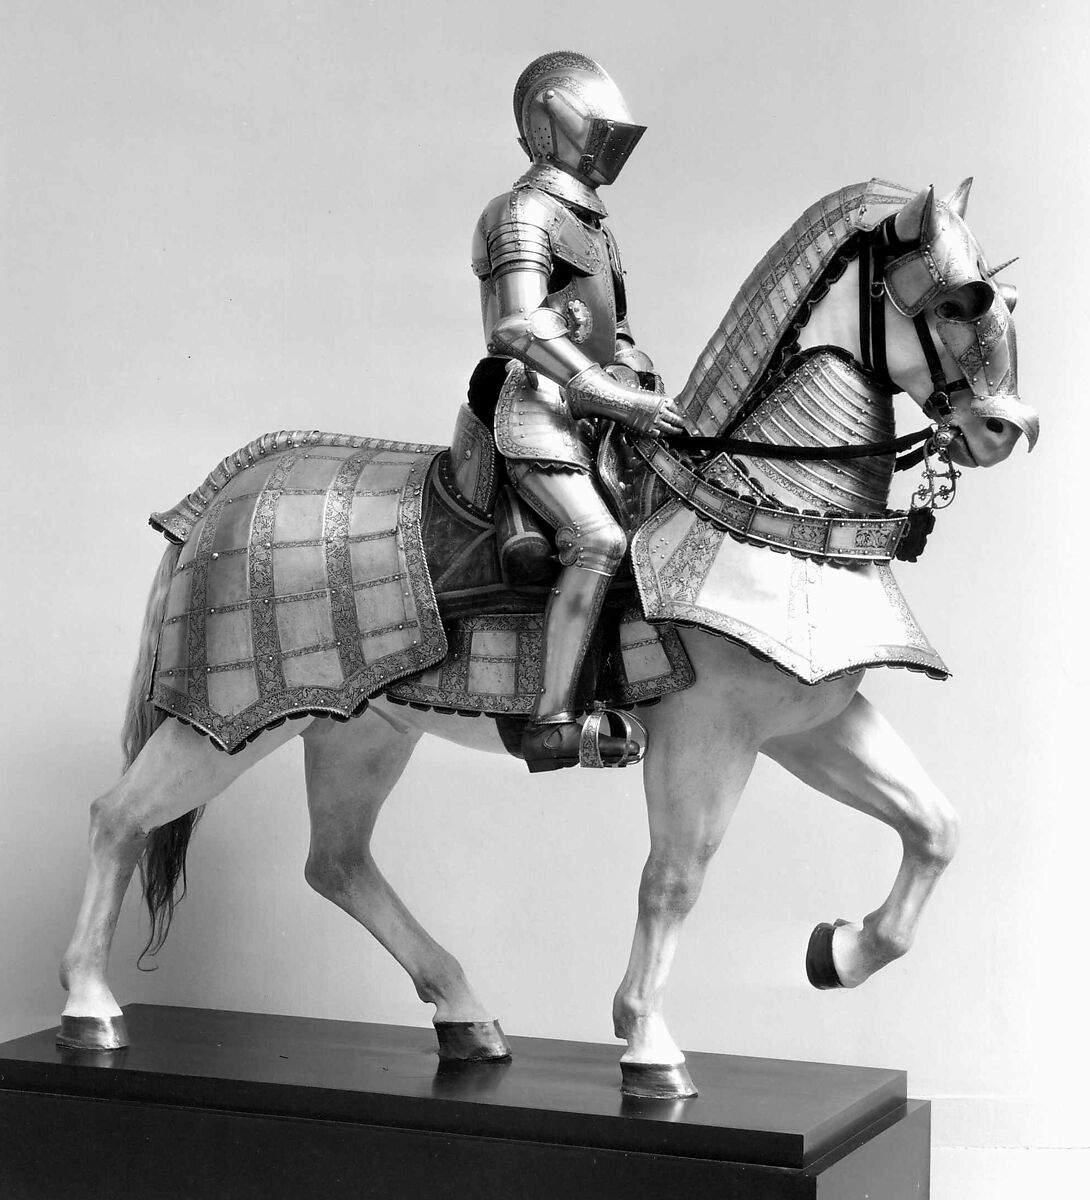 Horse Armor Made for a Member of the Collalto Family, Steel, gold, leather, Italian, probably Milan